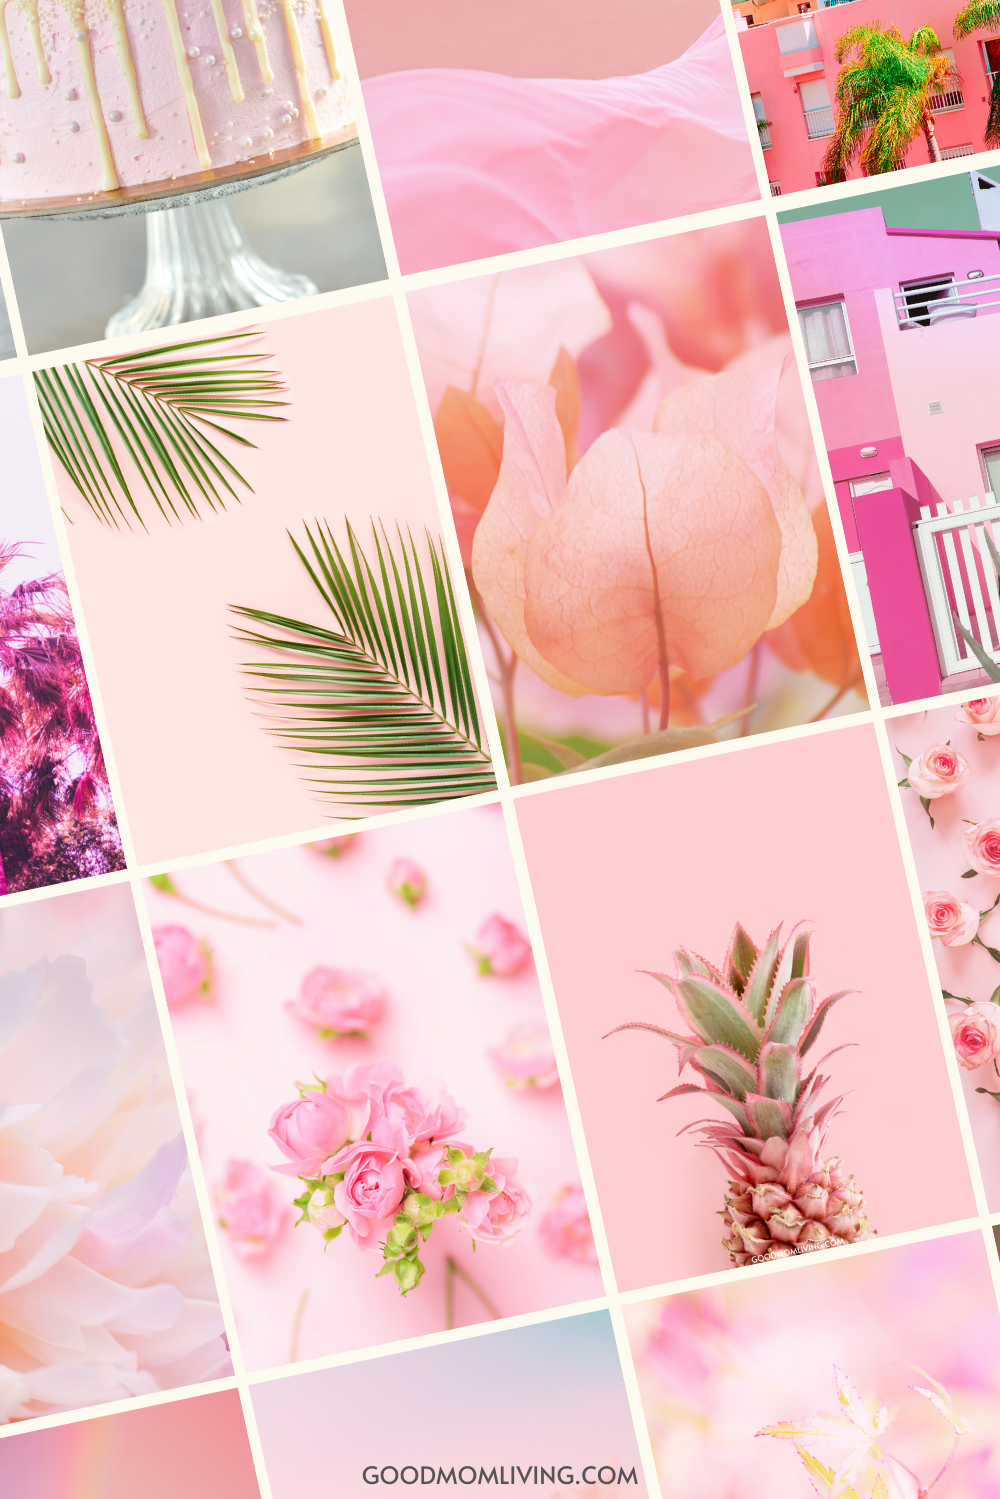 Pastel Pink Wallpaper Discover more Aesthetic, Cute, Iphone, Rose